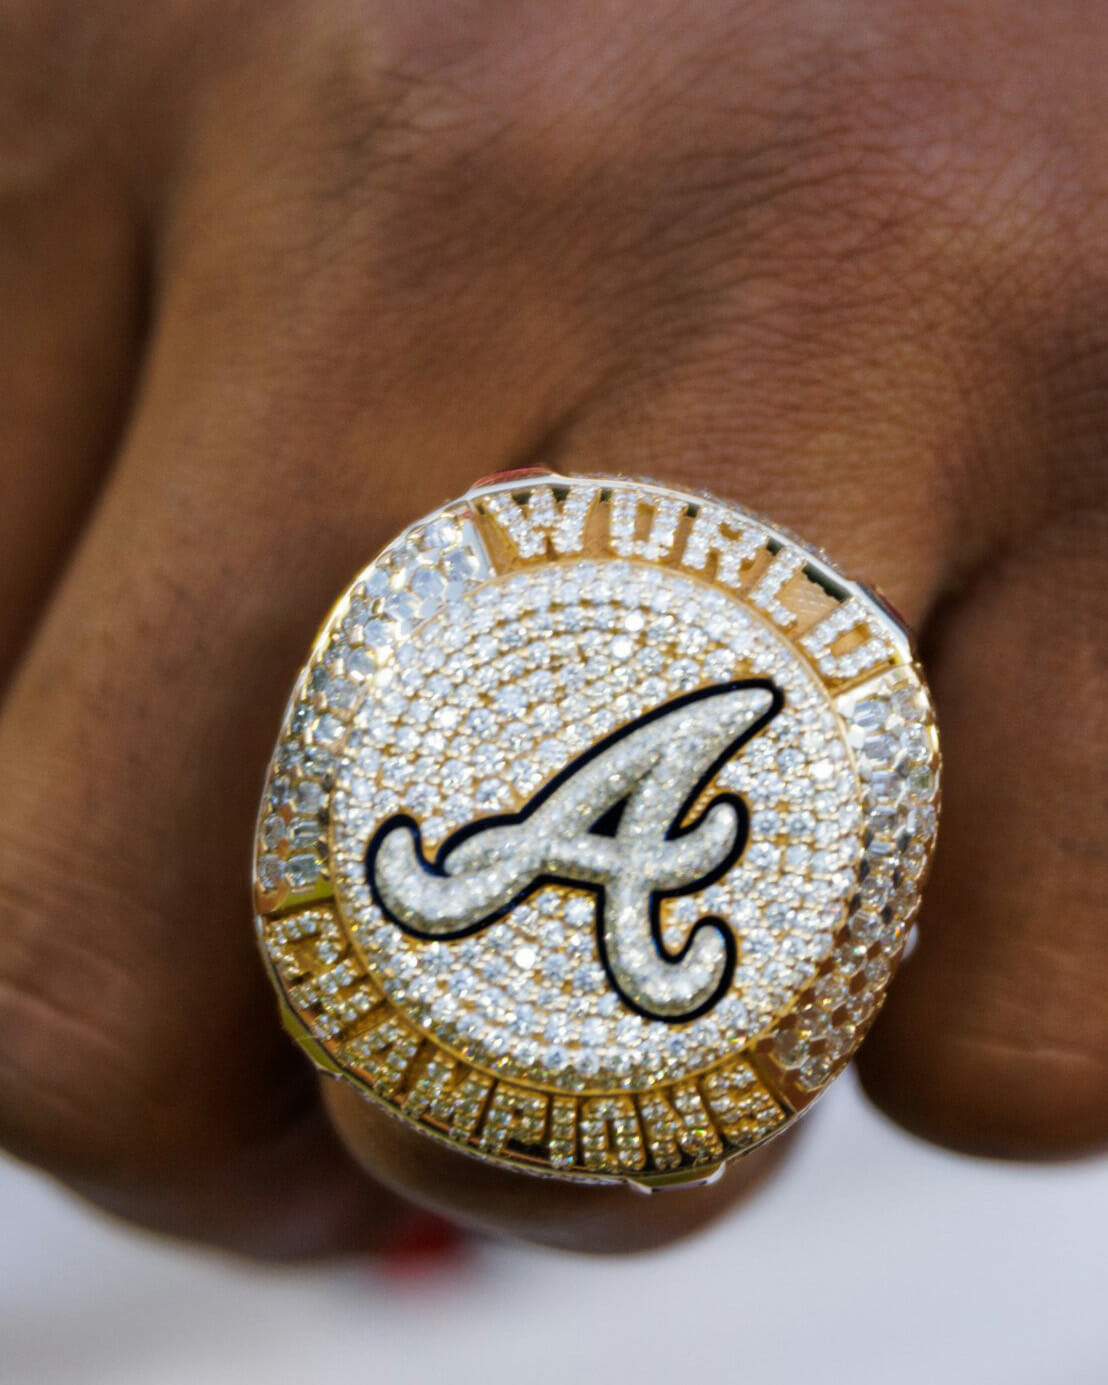 How the Braves added LED lights to their World Series ring